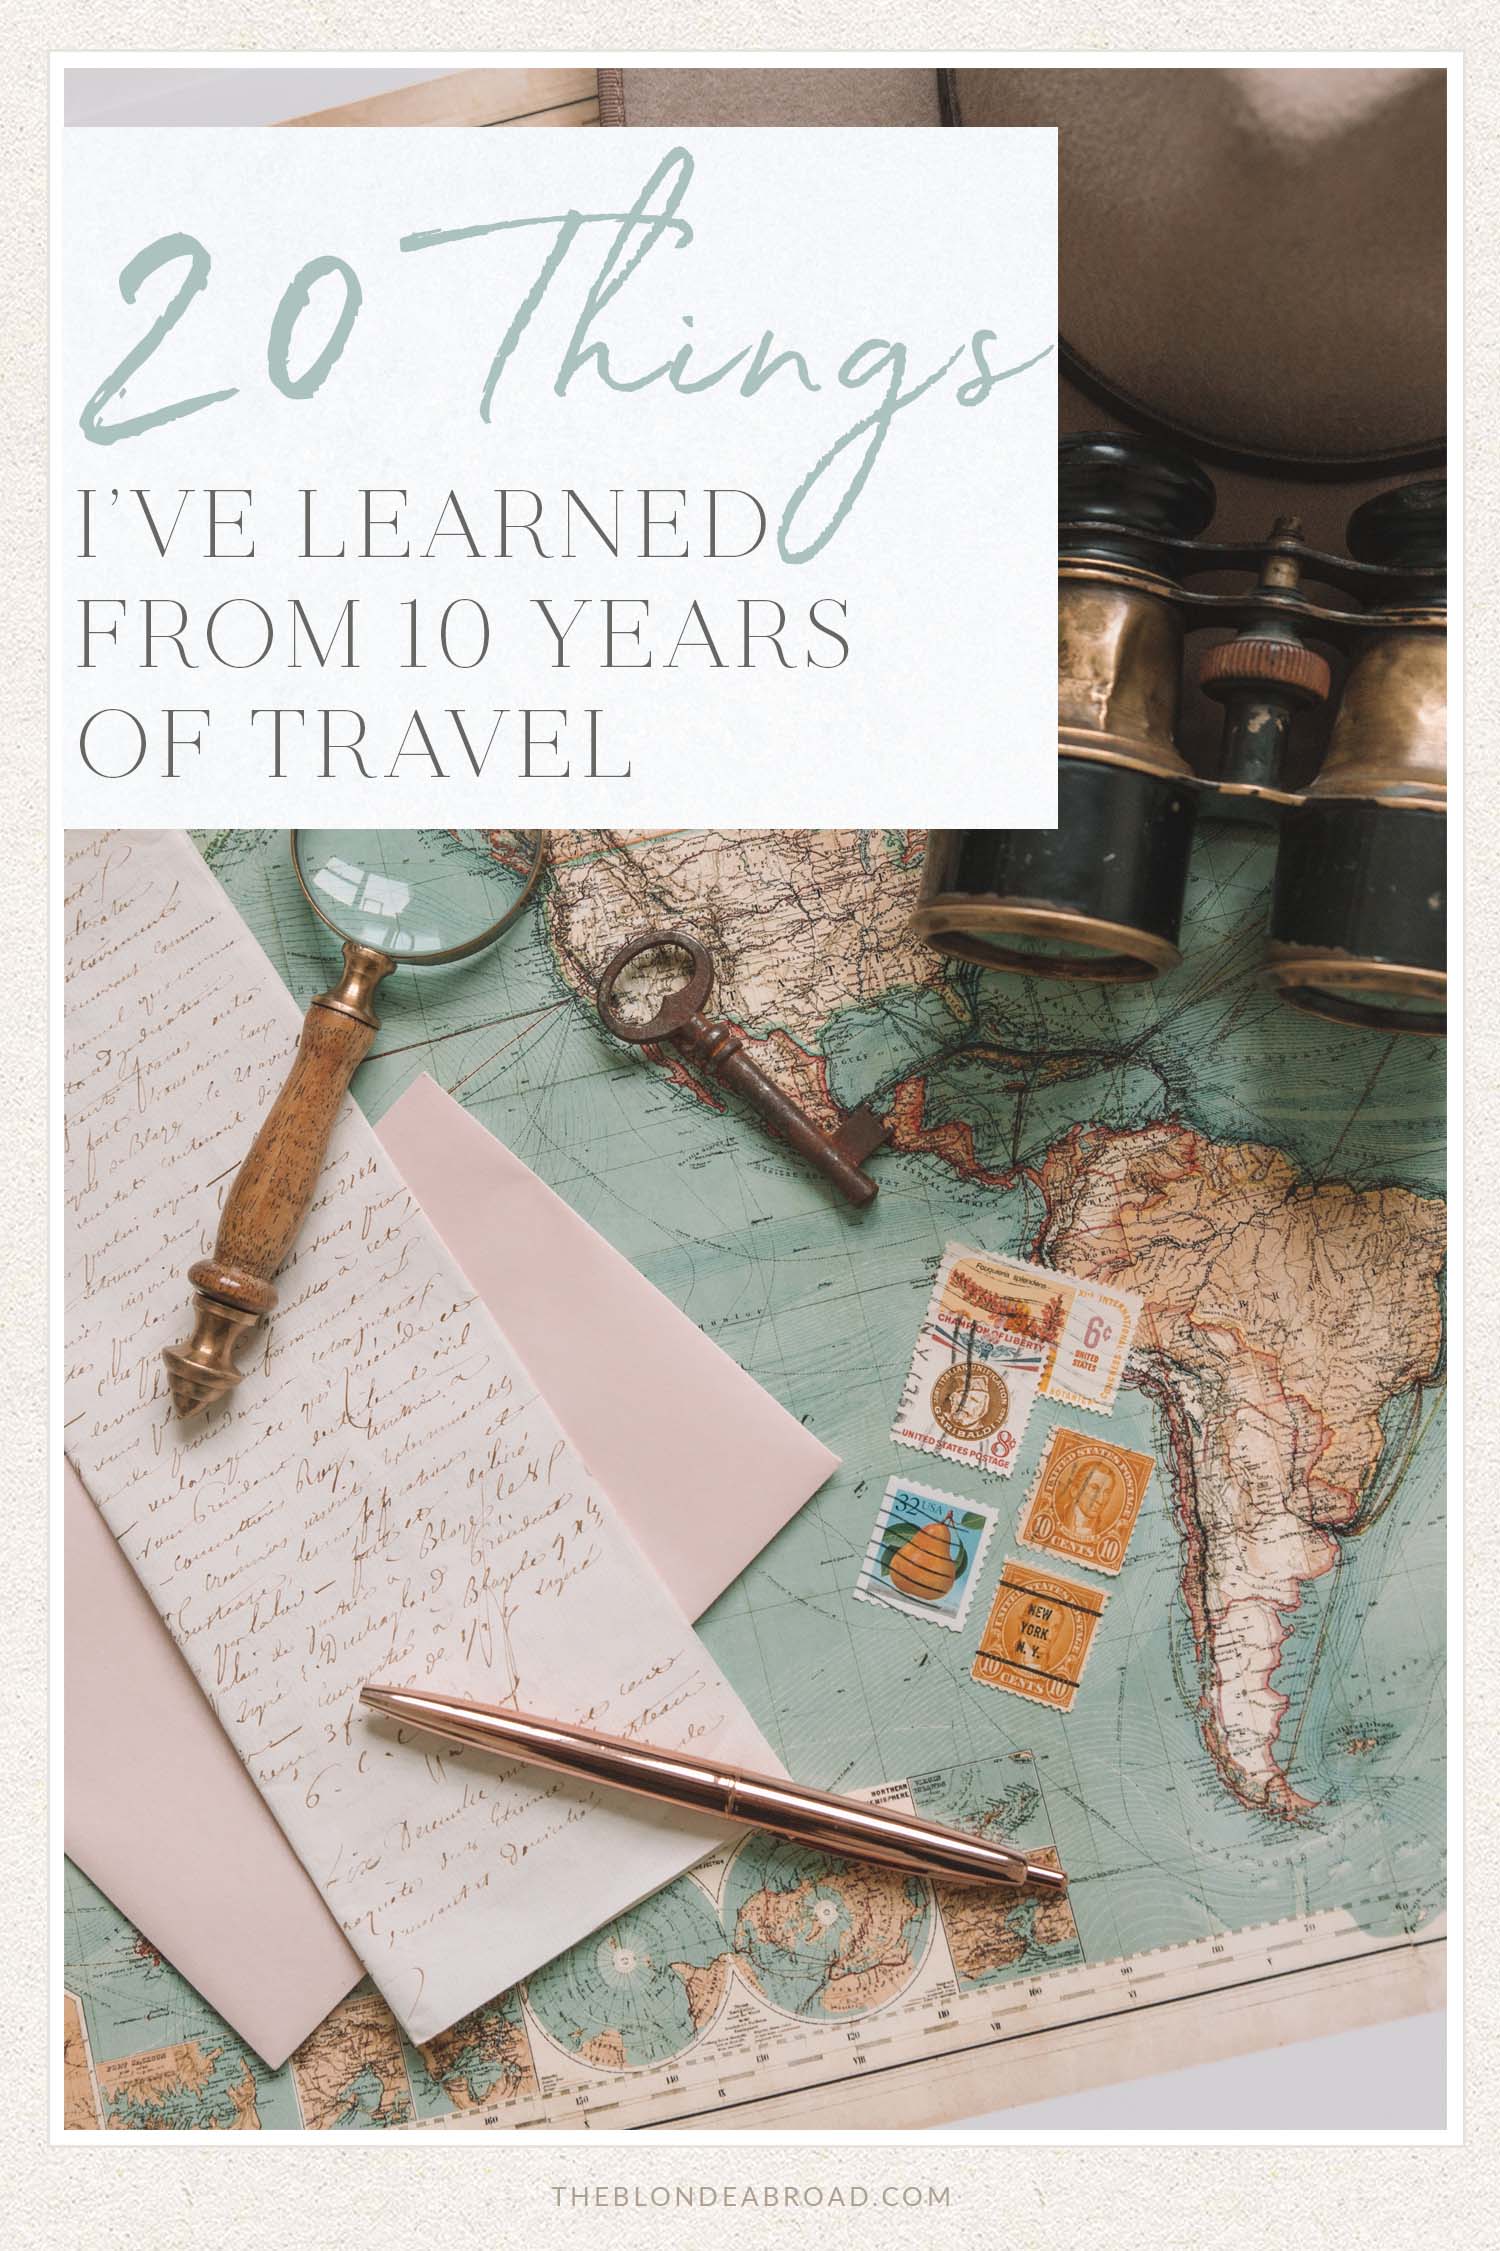 20 Things Learned 10 Years Travel